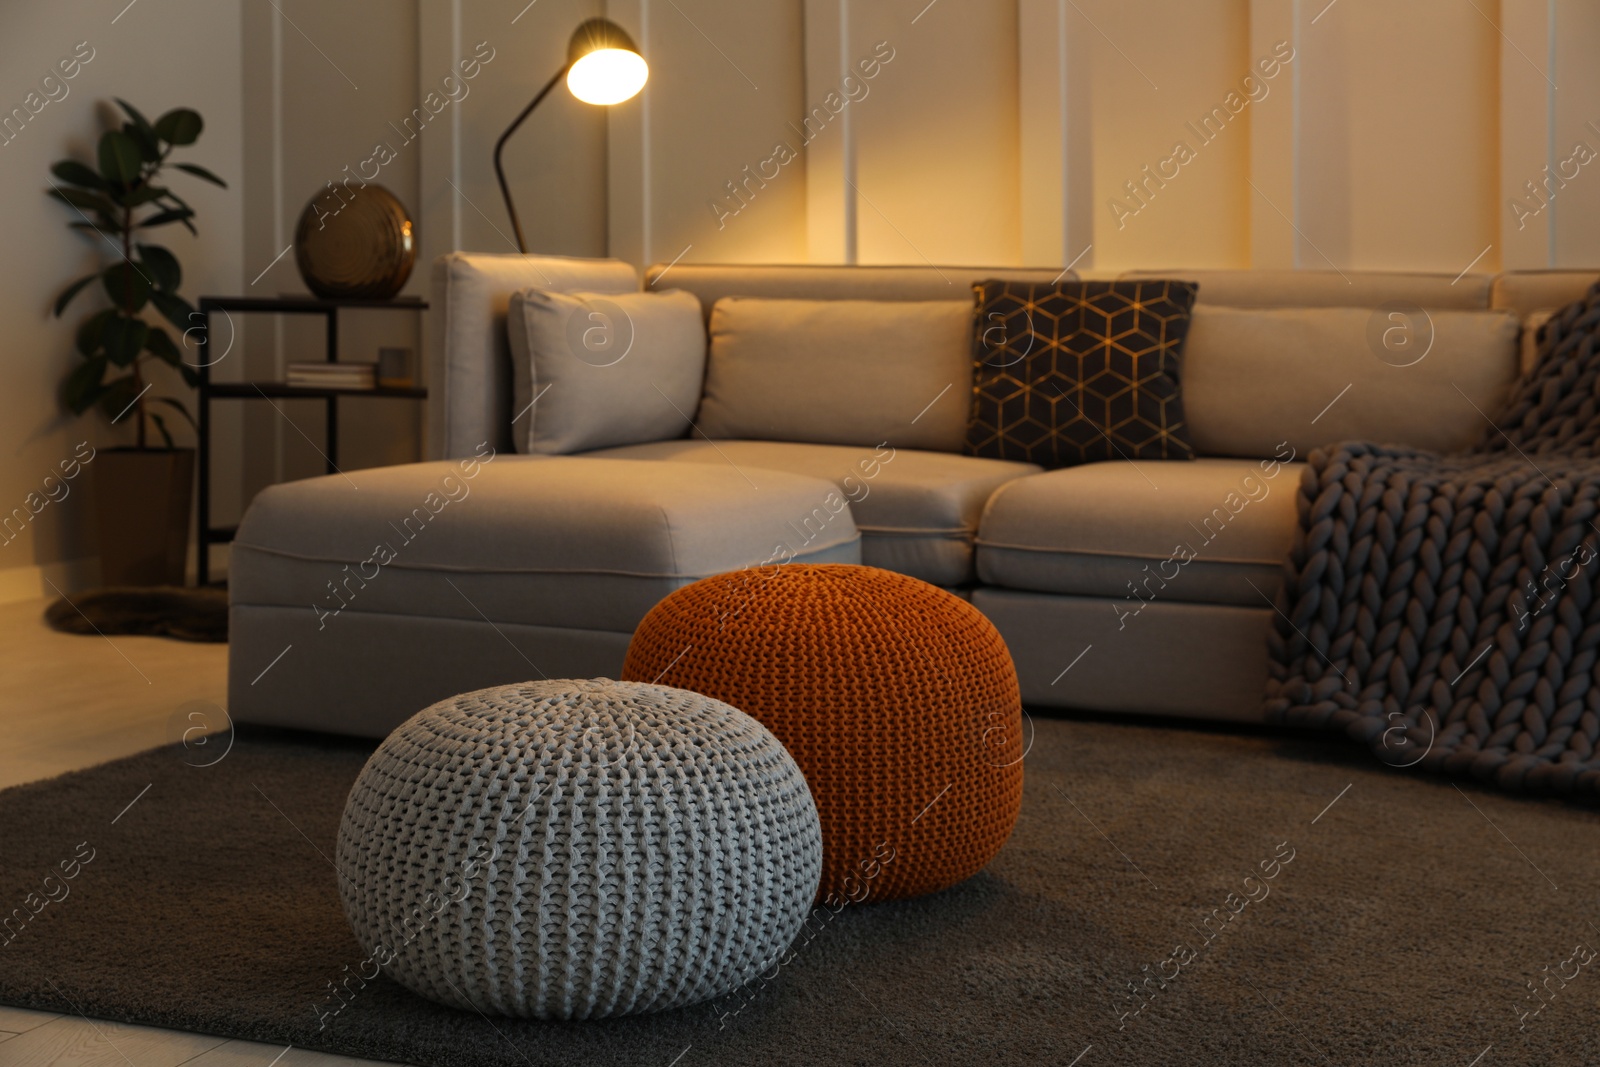 Photo of Living room interior with different stylish knitted poufs and sofa